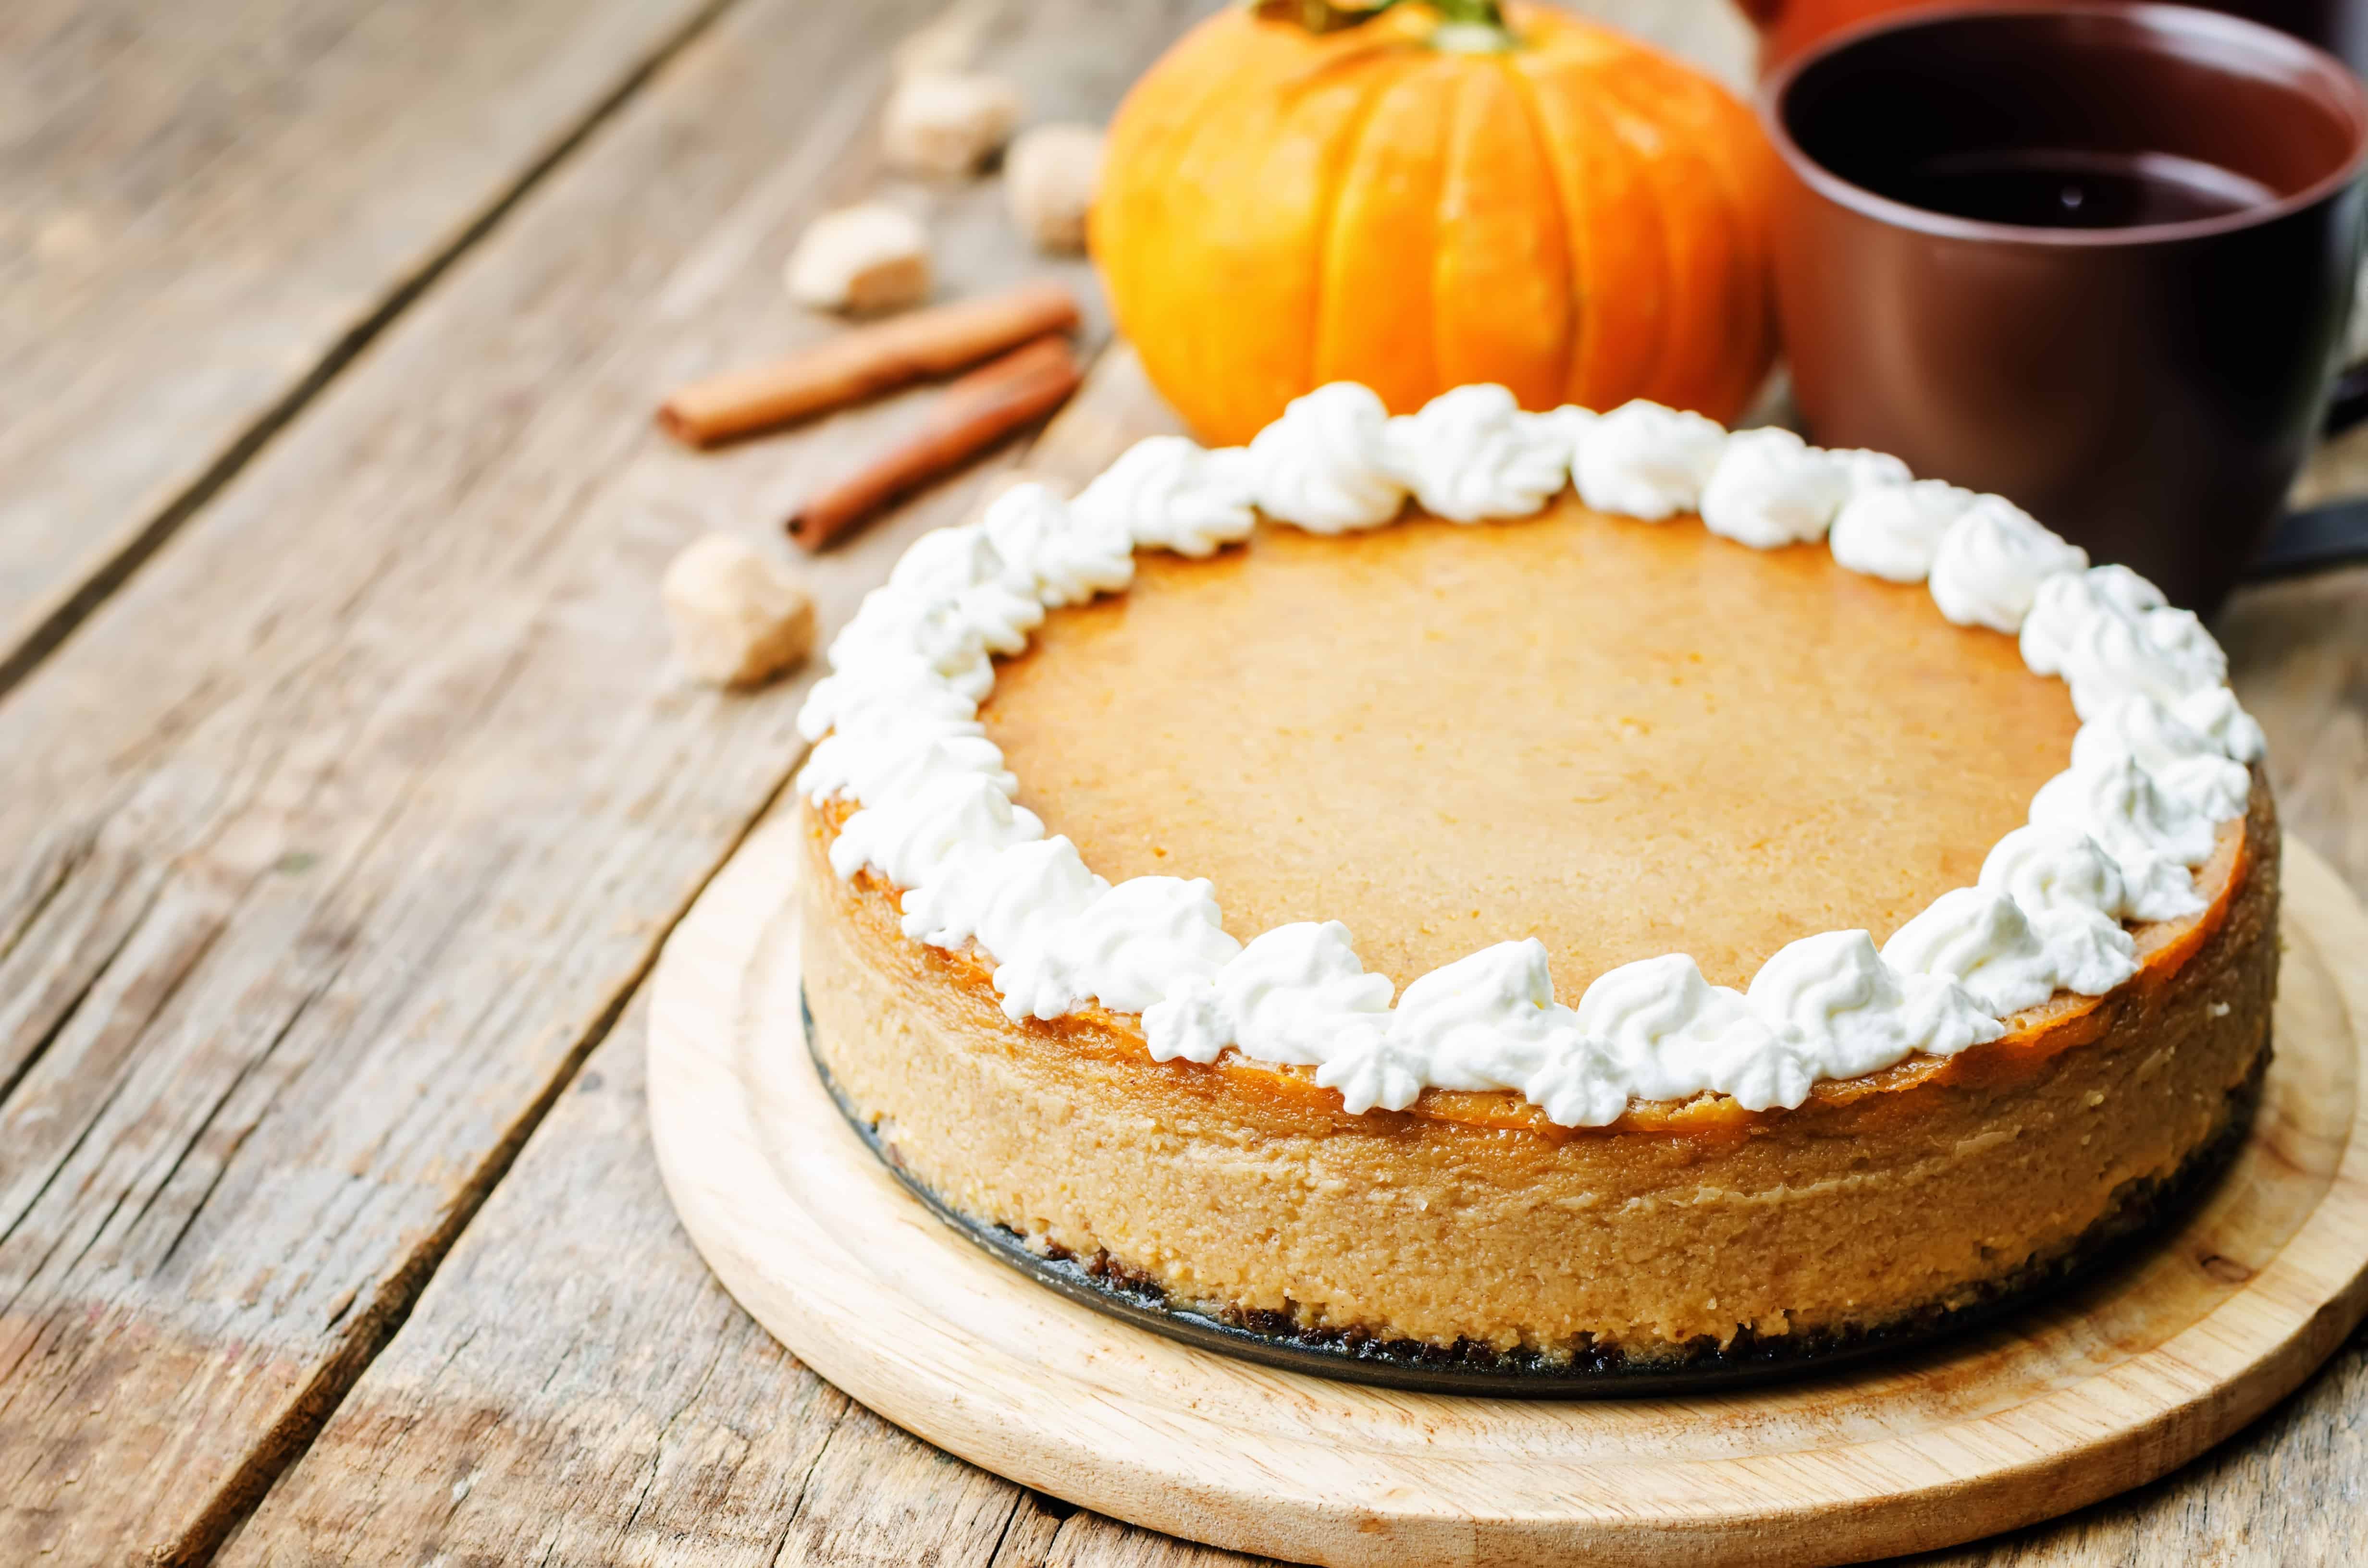 pumpkin cheesecake decorated with whipped cream. the toning. selective focus